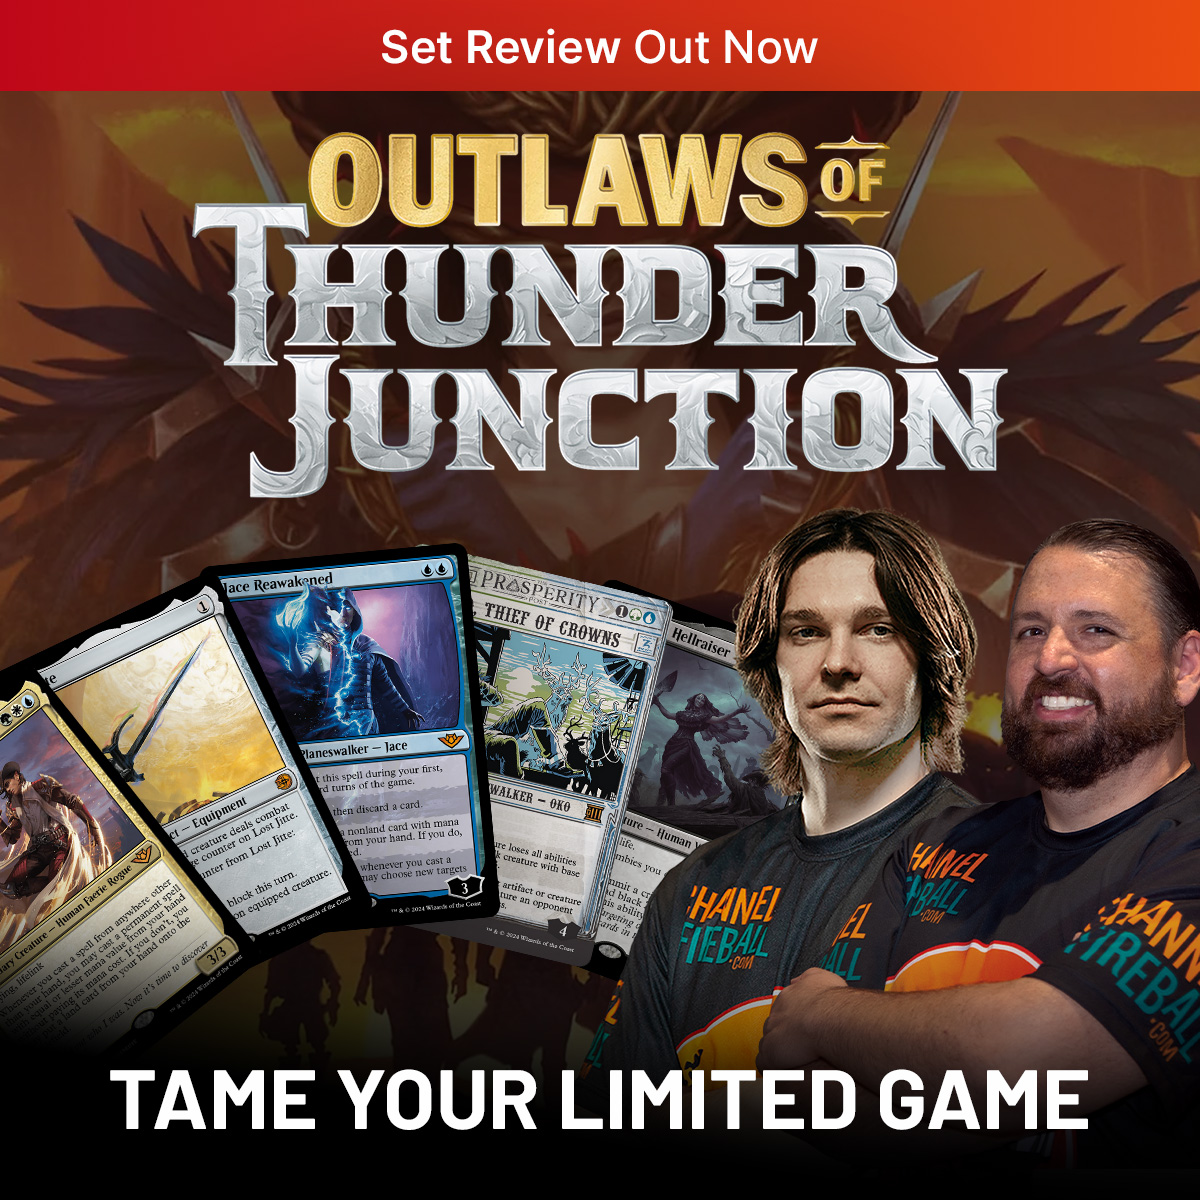 Master the Wild West of Limited with the expert help of @ReidDuke and @lsv! All Limited Set Reviews are FREE and out now! bit.ly/4aVowtR